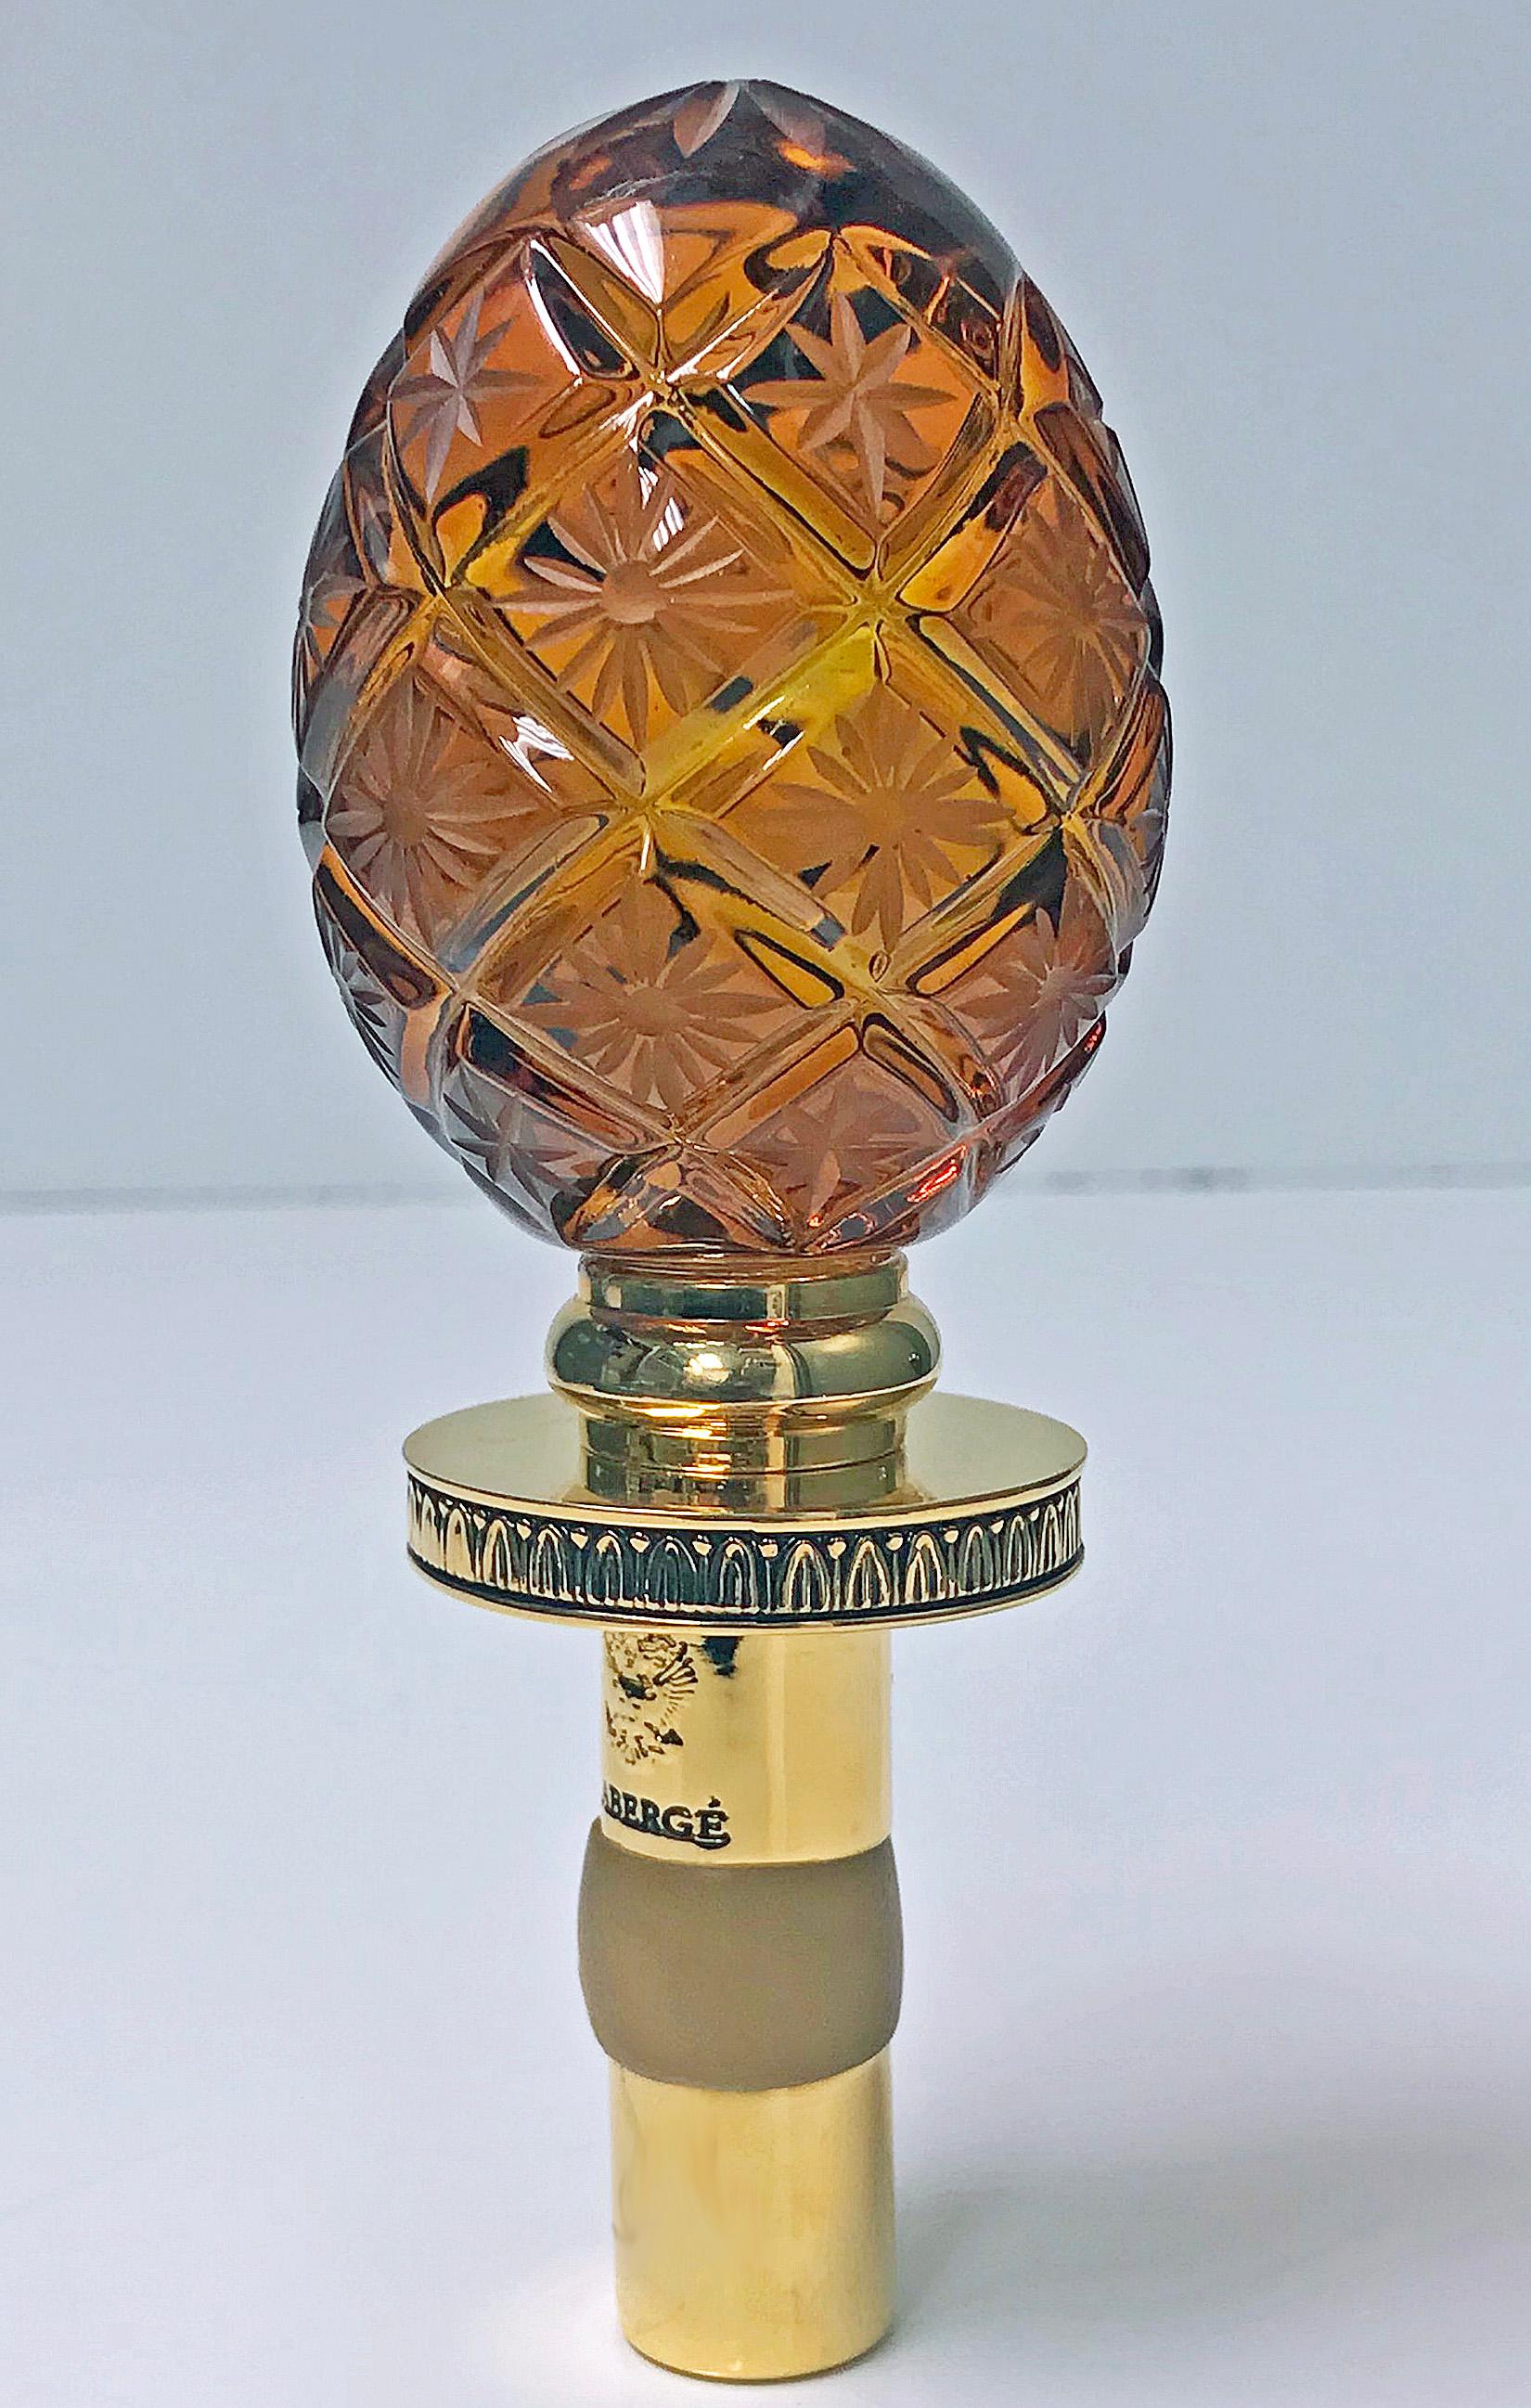 Faberge amber crystal bottle stopper, original box with booklets. Made in Germany. Unused, still in original box. Mounted on a patented expandable and adjustable bottle stopper that fits any size wine bottle and creates an airtight seal. Measures: